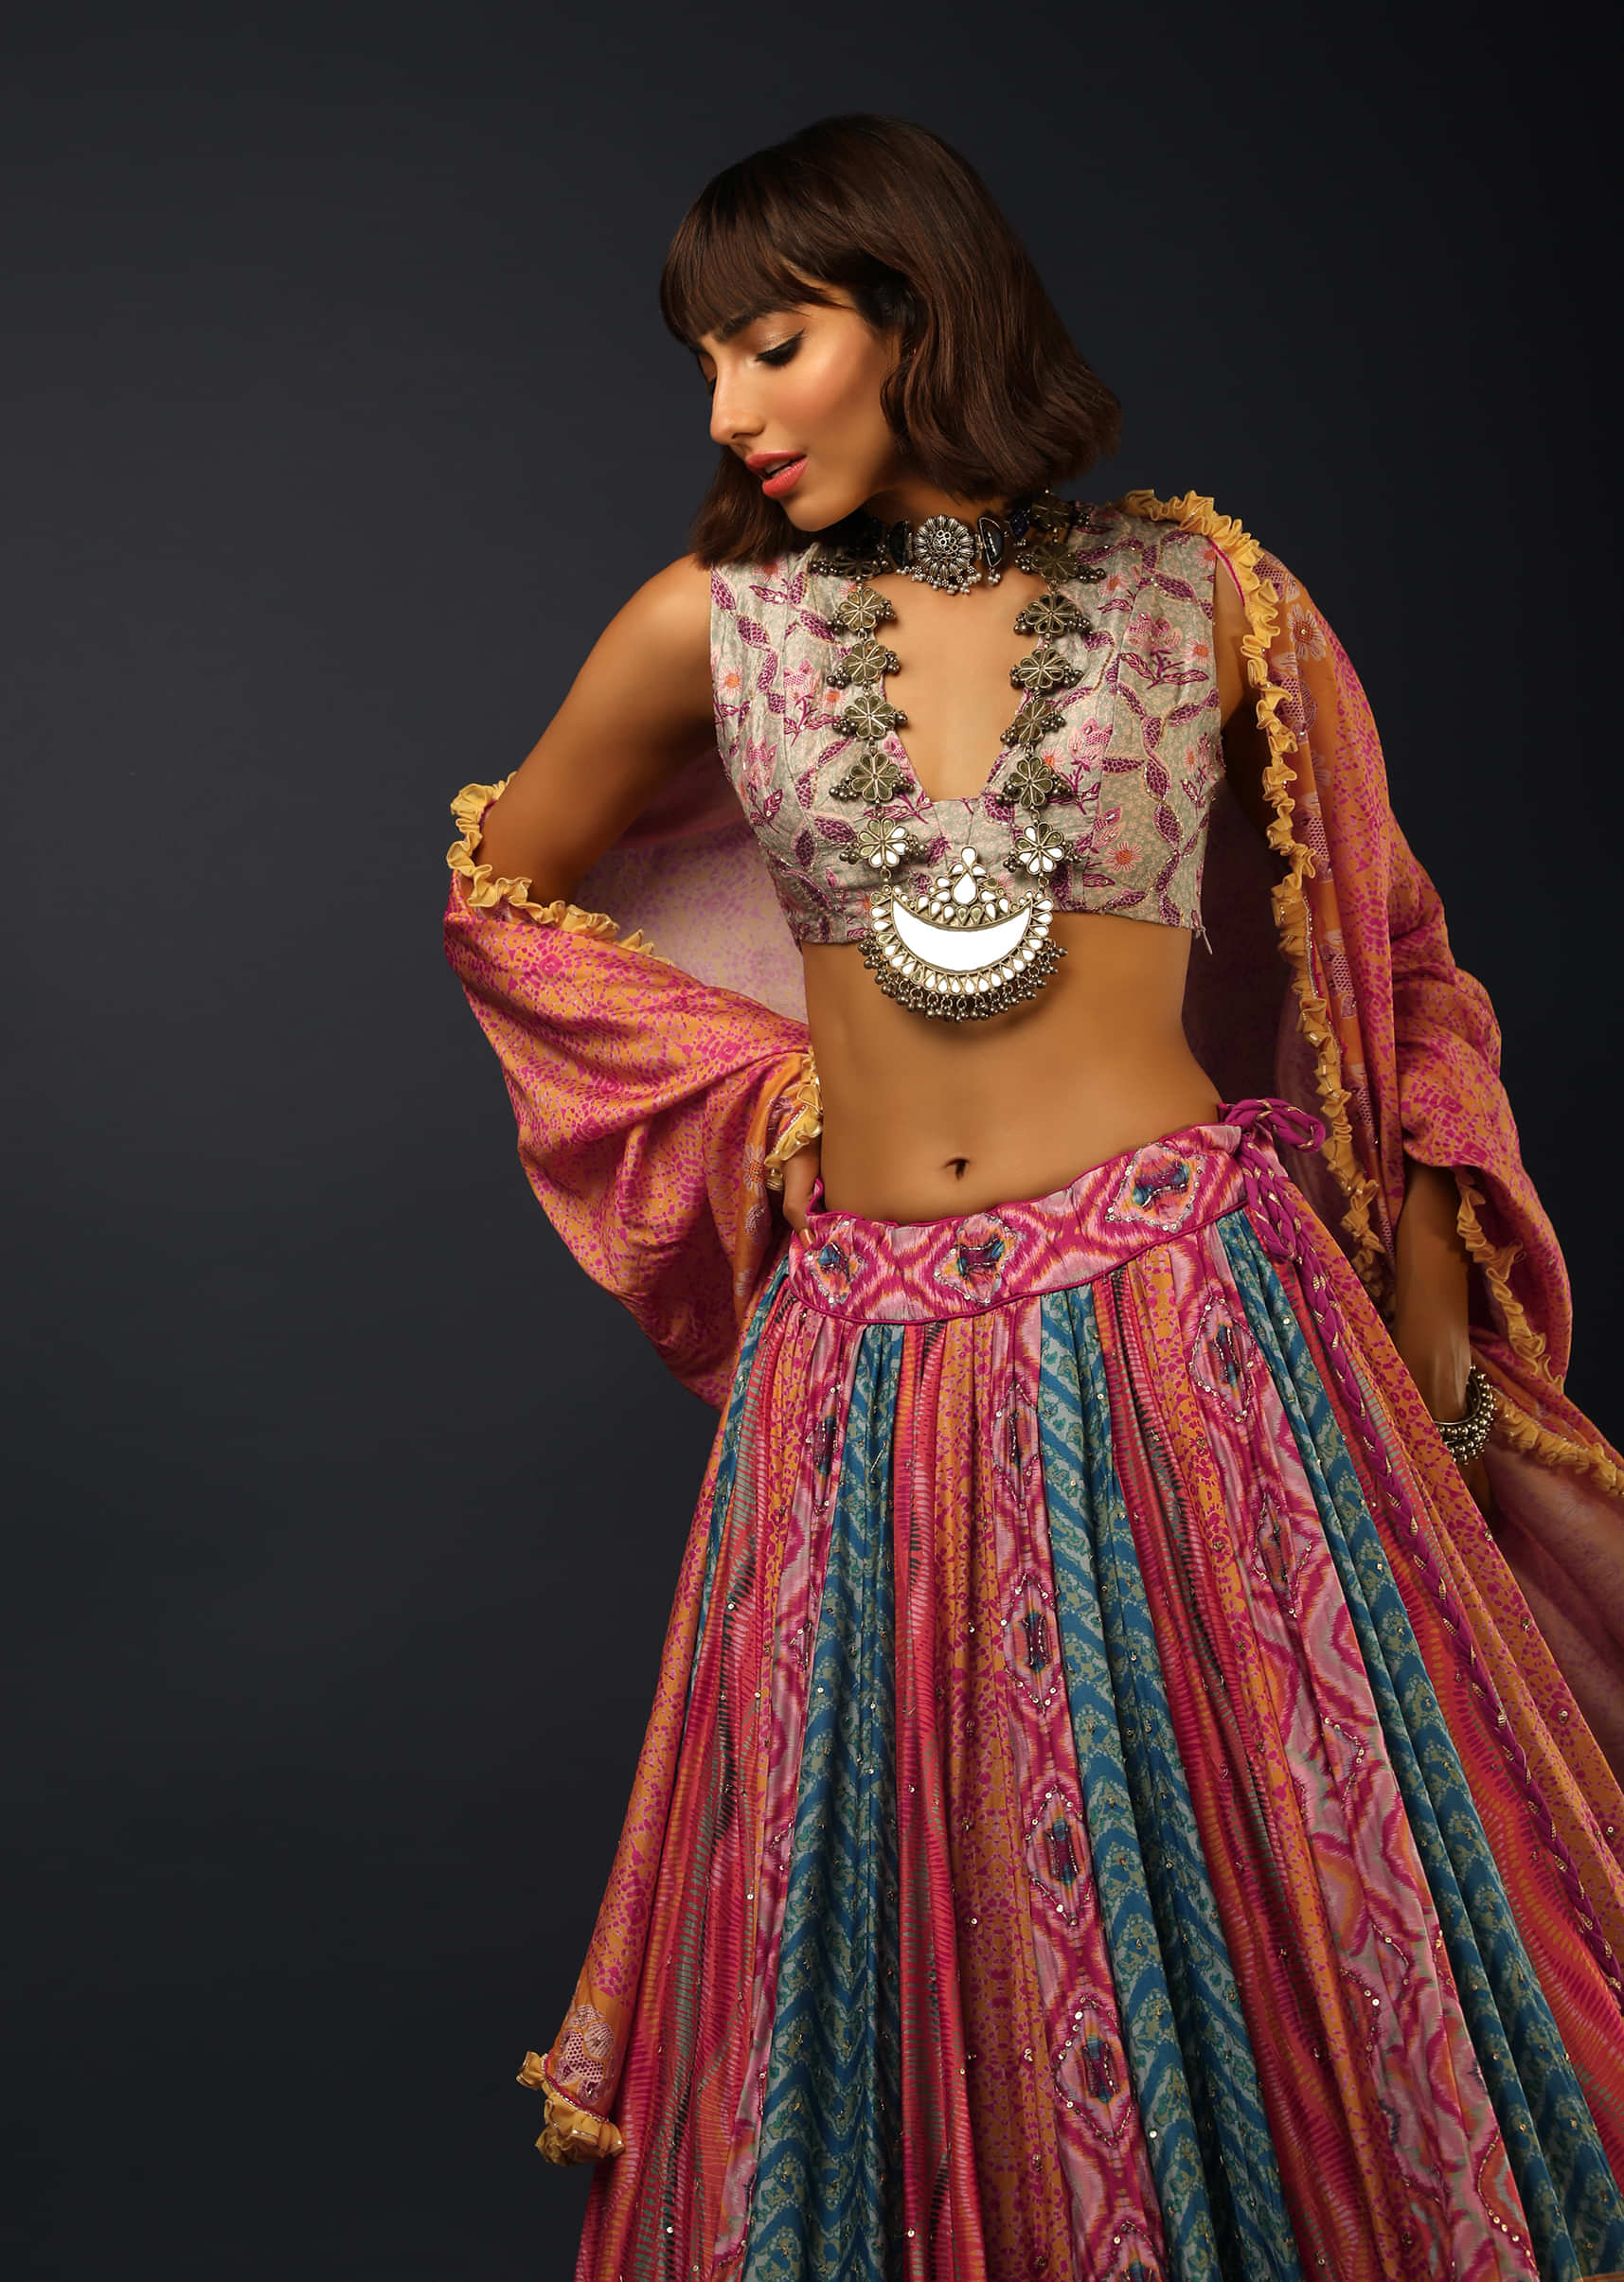 Multi Colored Lehenga In Silk With Assorted Printed Kalis And Hand Embroidery Detailing 